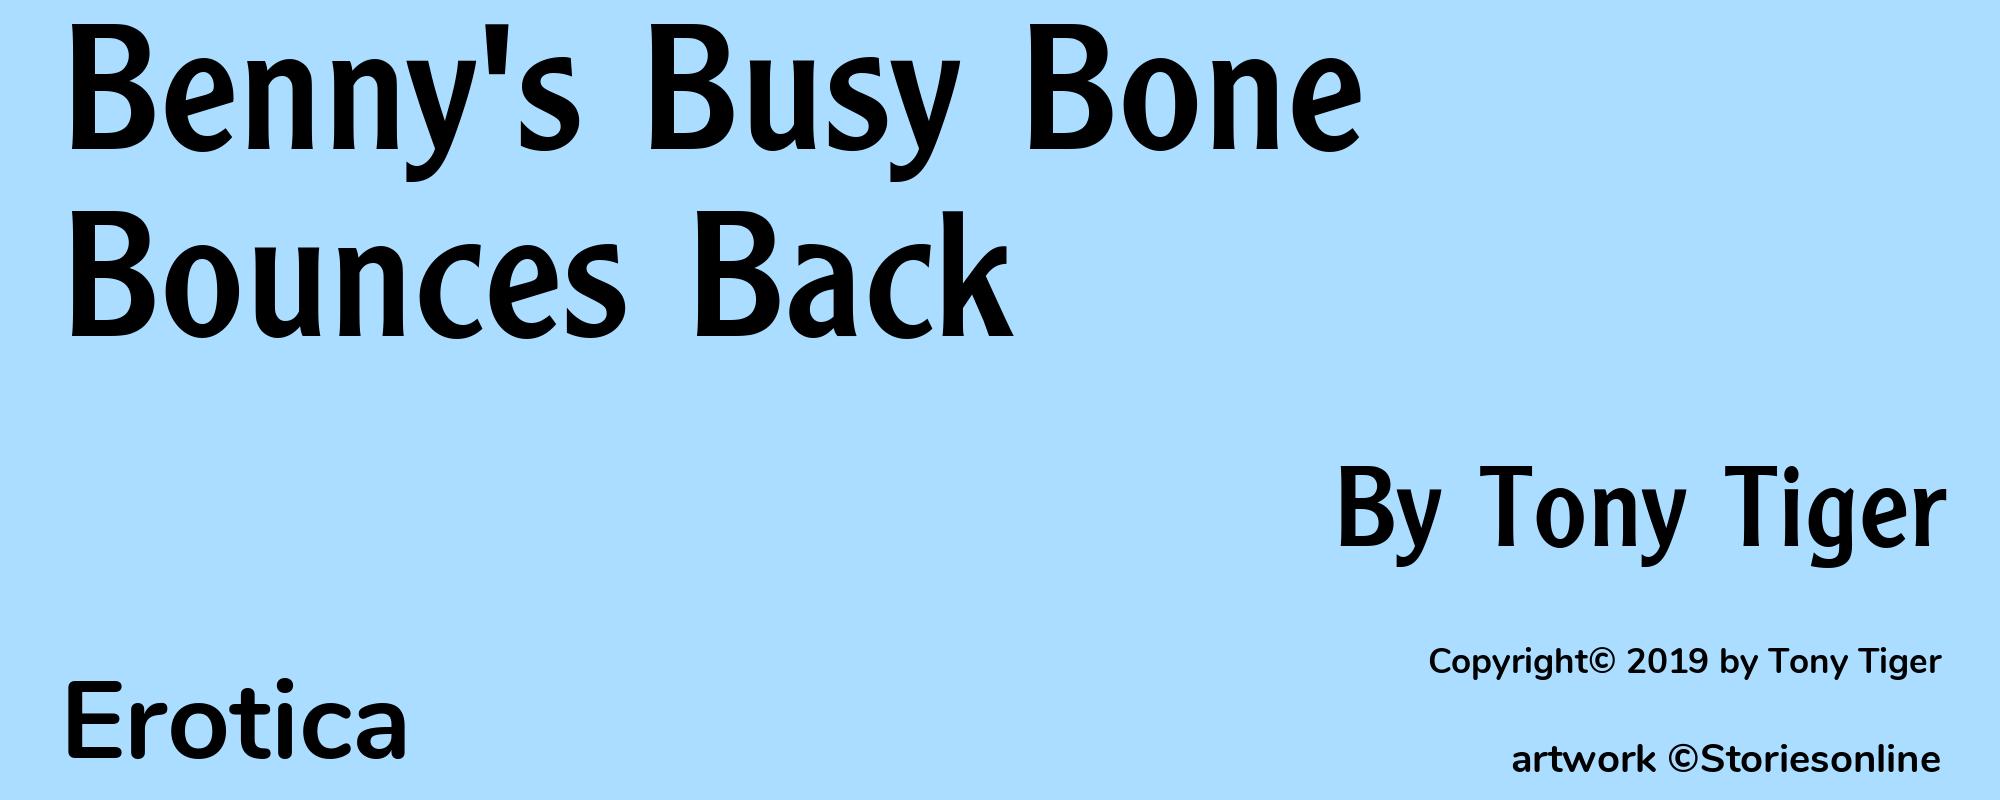 Benny's Busy Bone Bounces Back - Cover